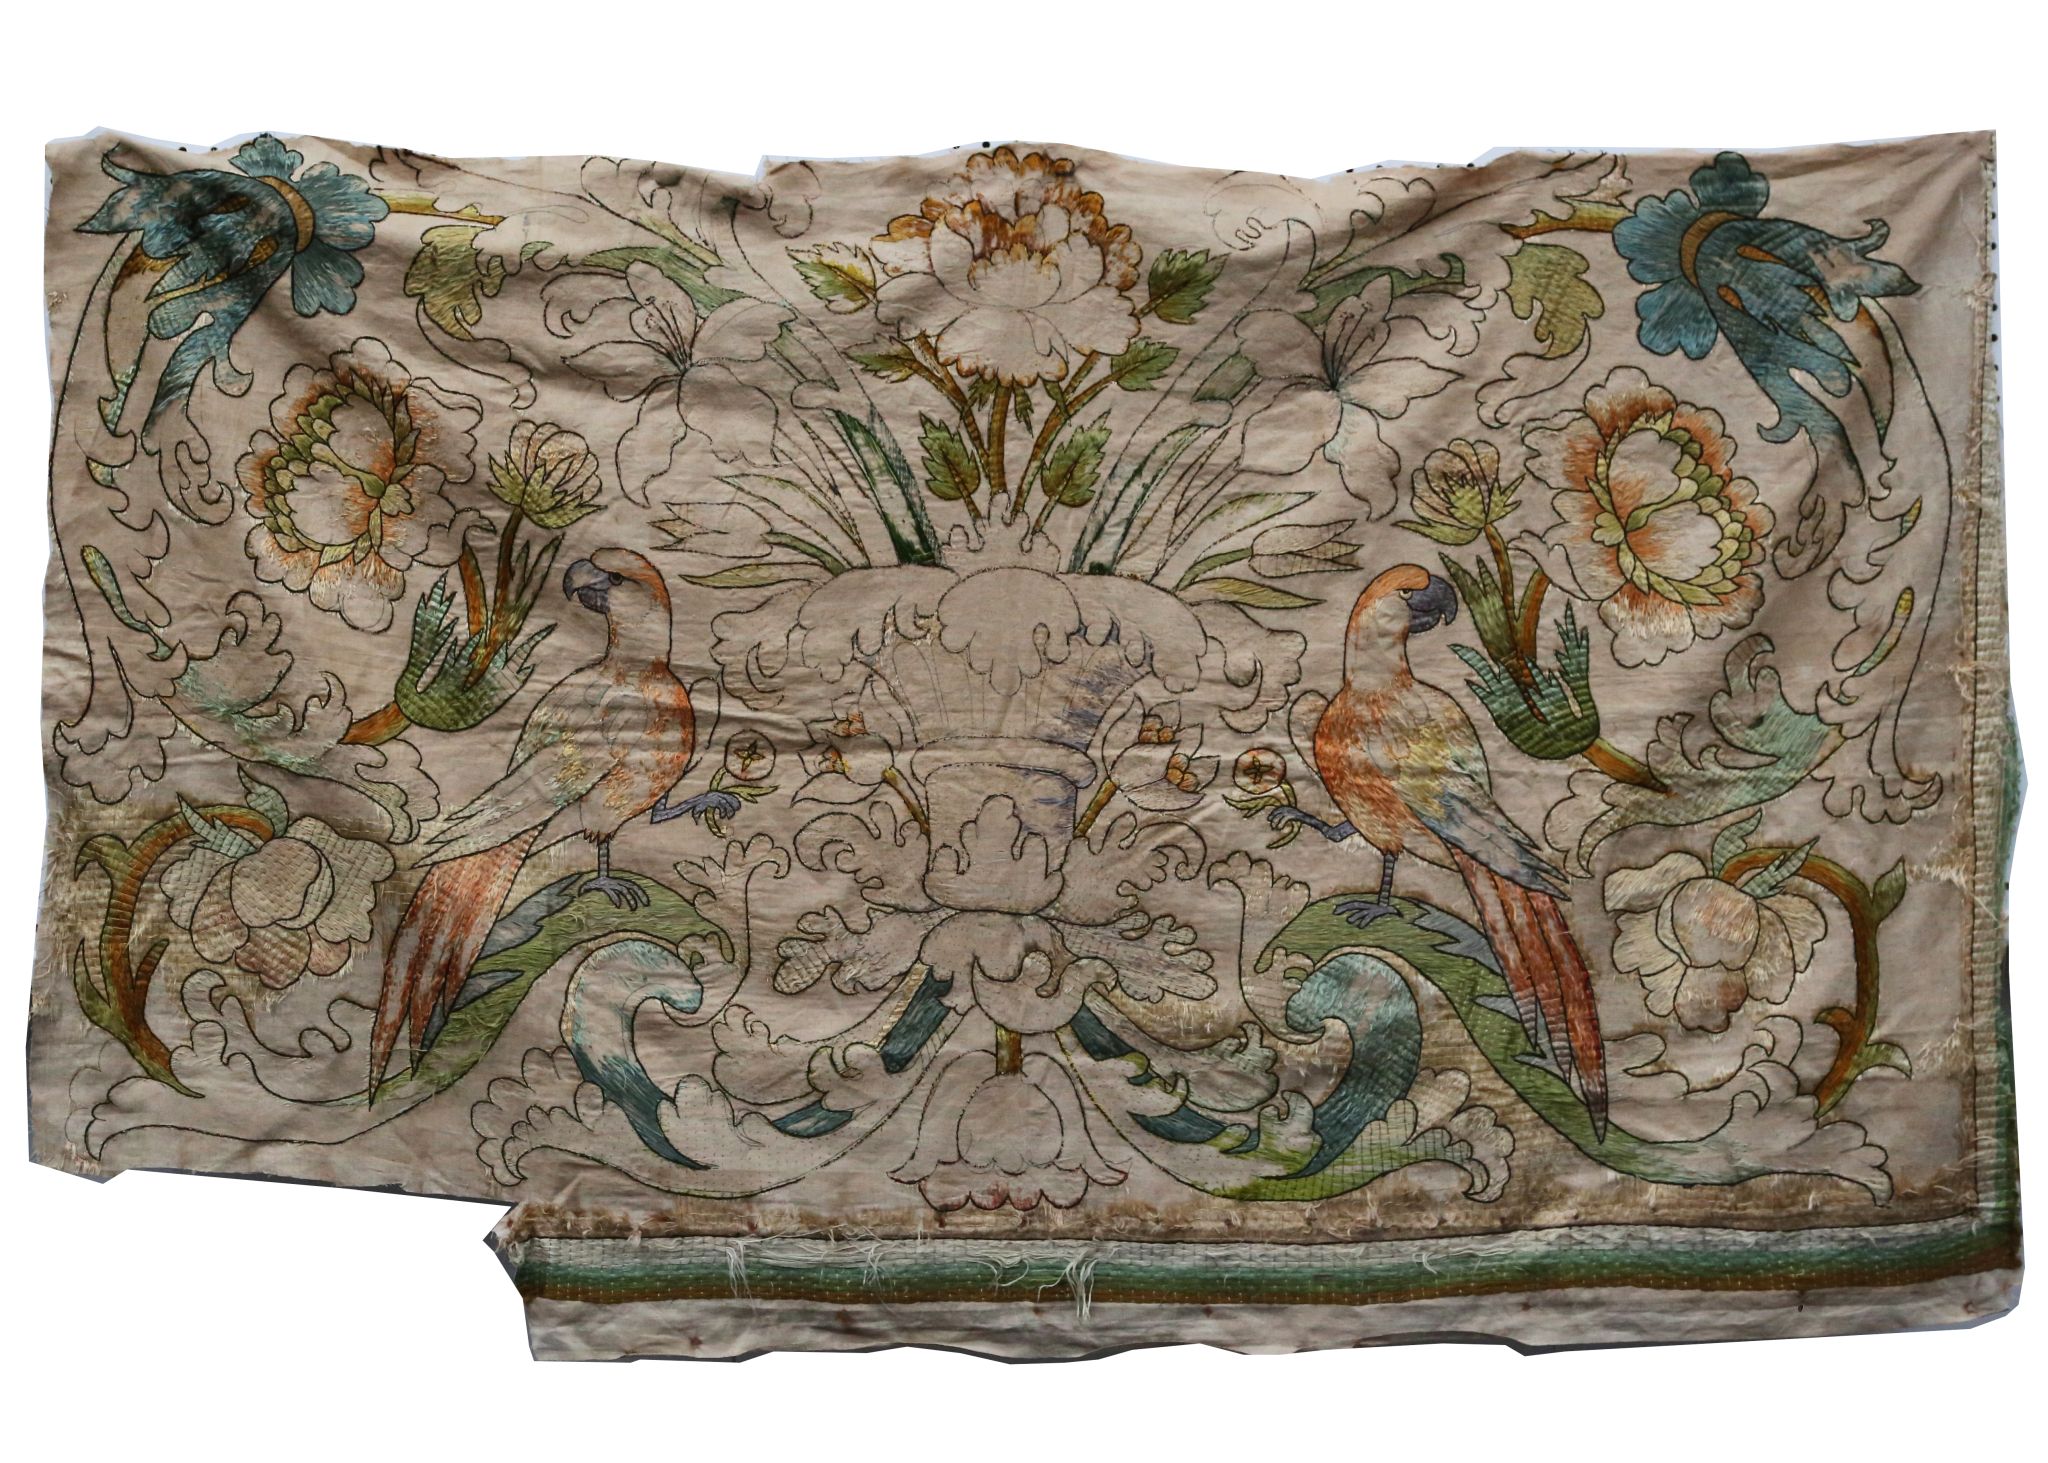 A LARGE 17TH CENTURY SPANISH EMBROIDERED PANEL WORKED IN COLOURED SILKS ON LINEN DEPICTING PARROTS - Image 7 of 7